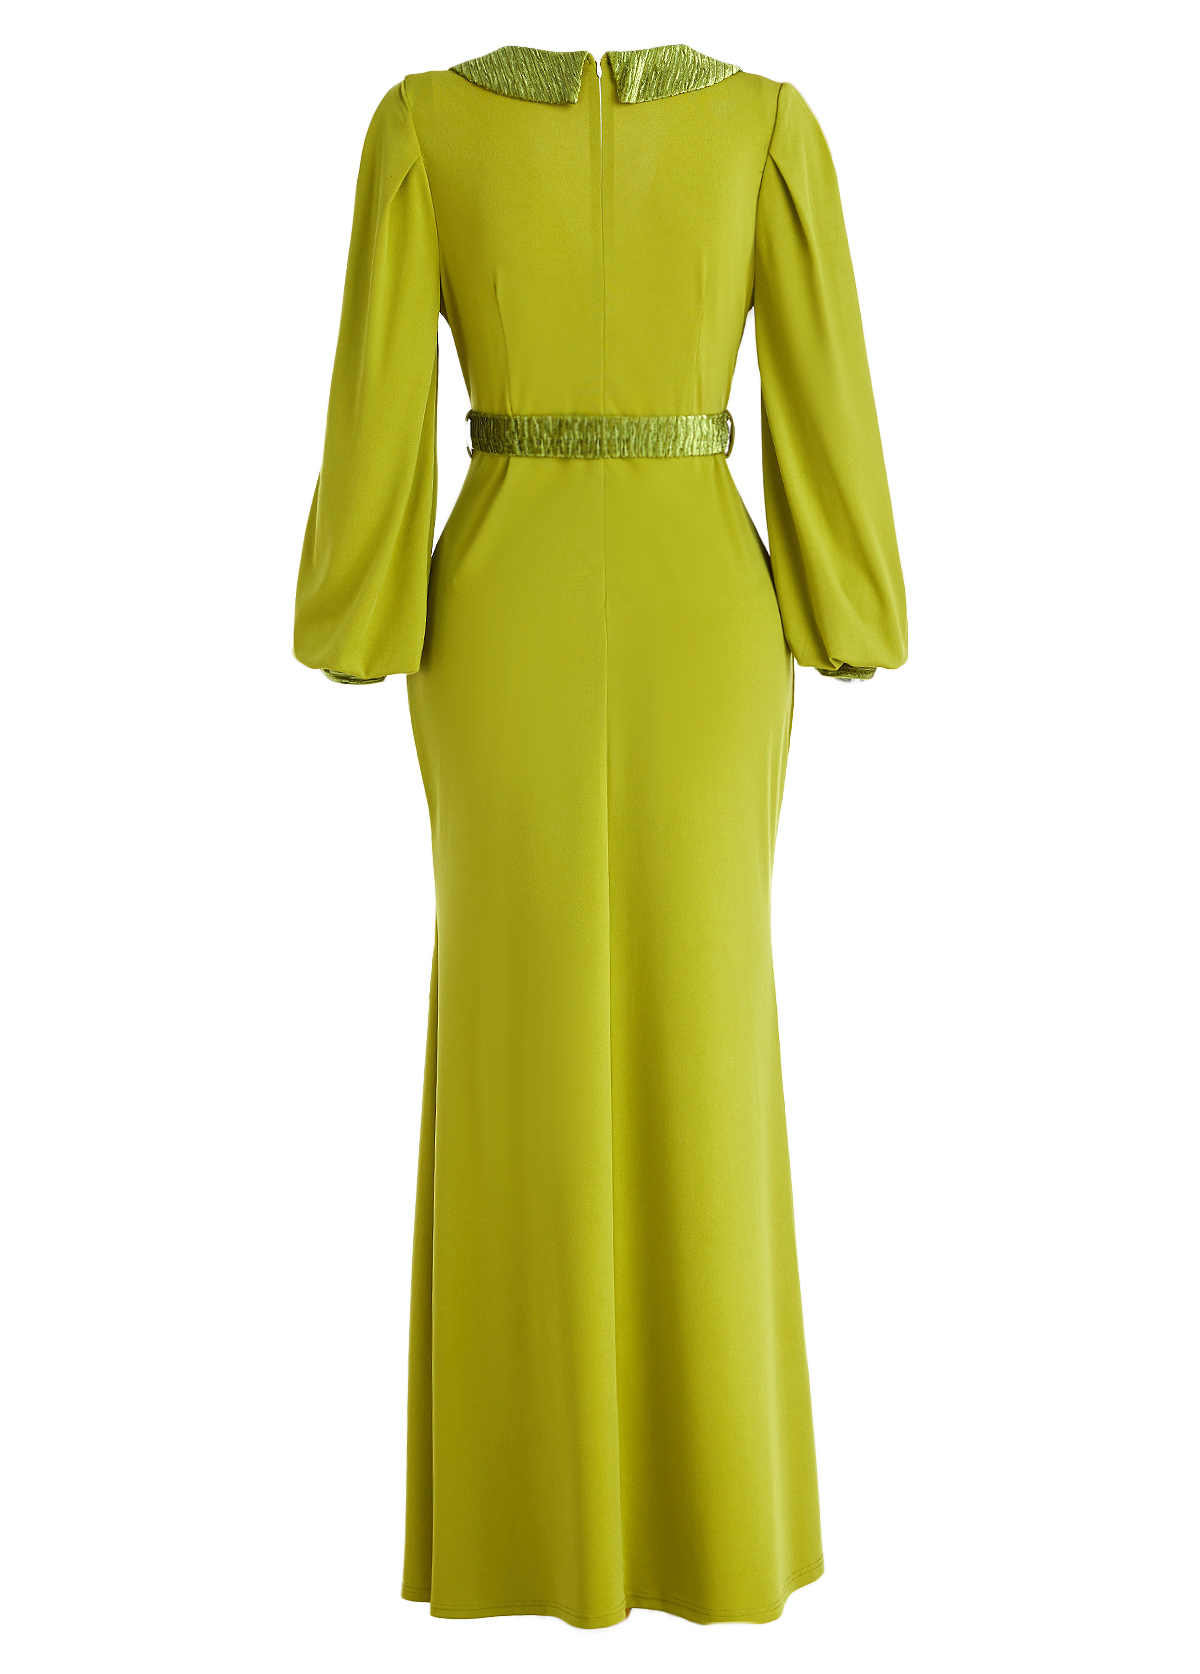 Mustard Yellow Patchwork Belted Long Sleeve Dress